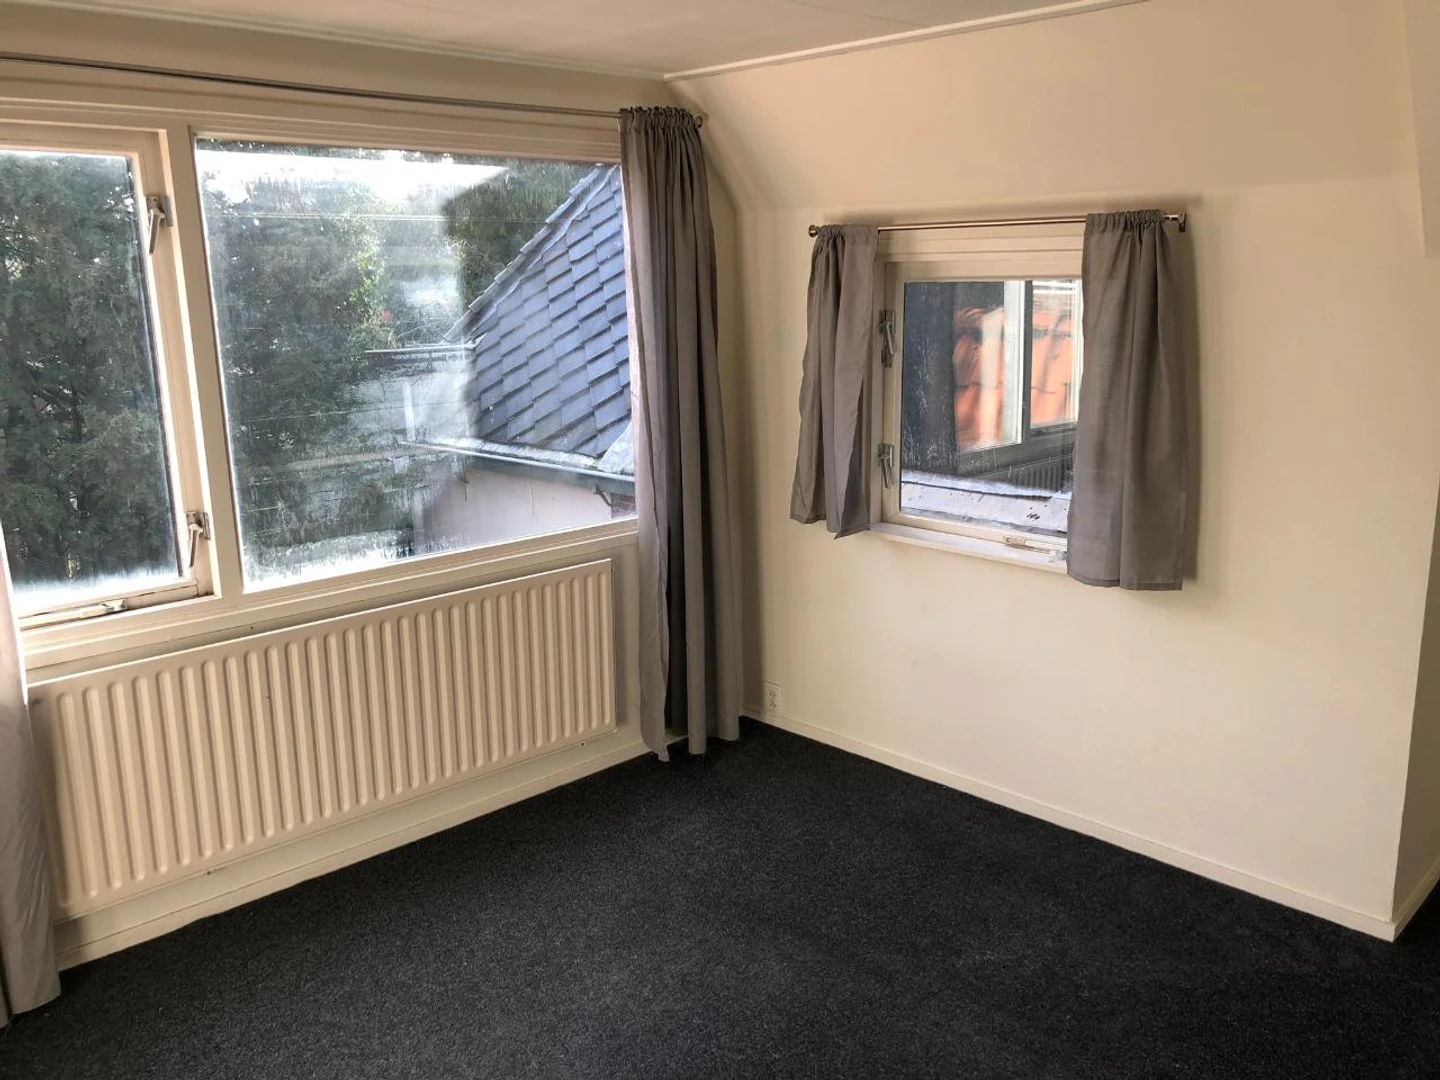 Room for rent in a shared flat in leeuwarden